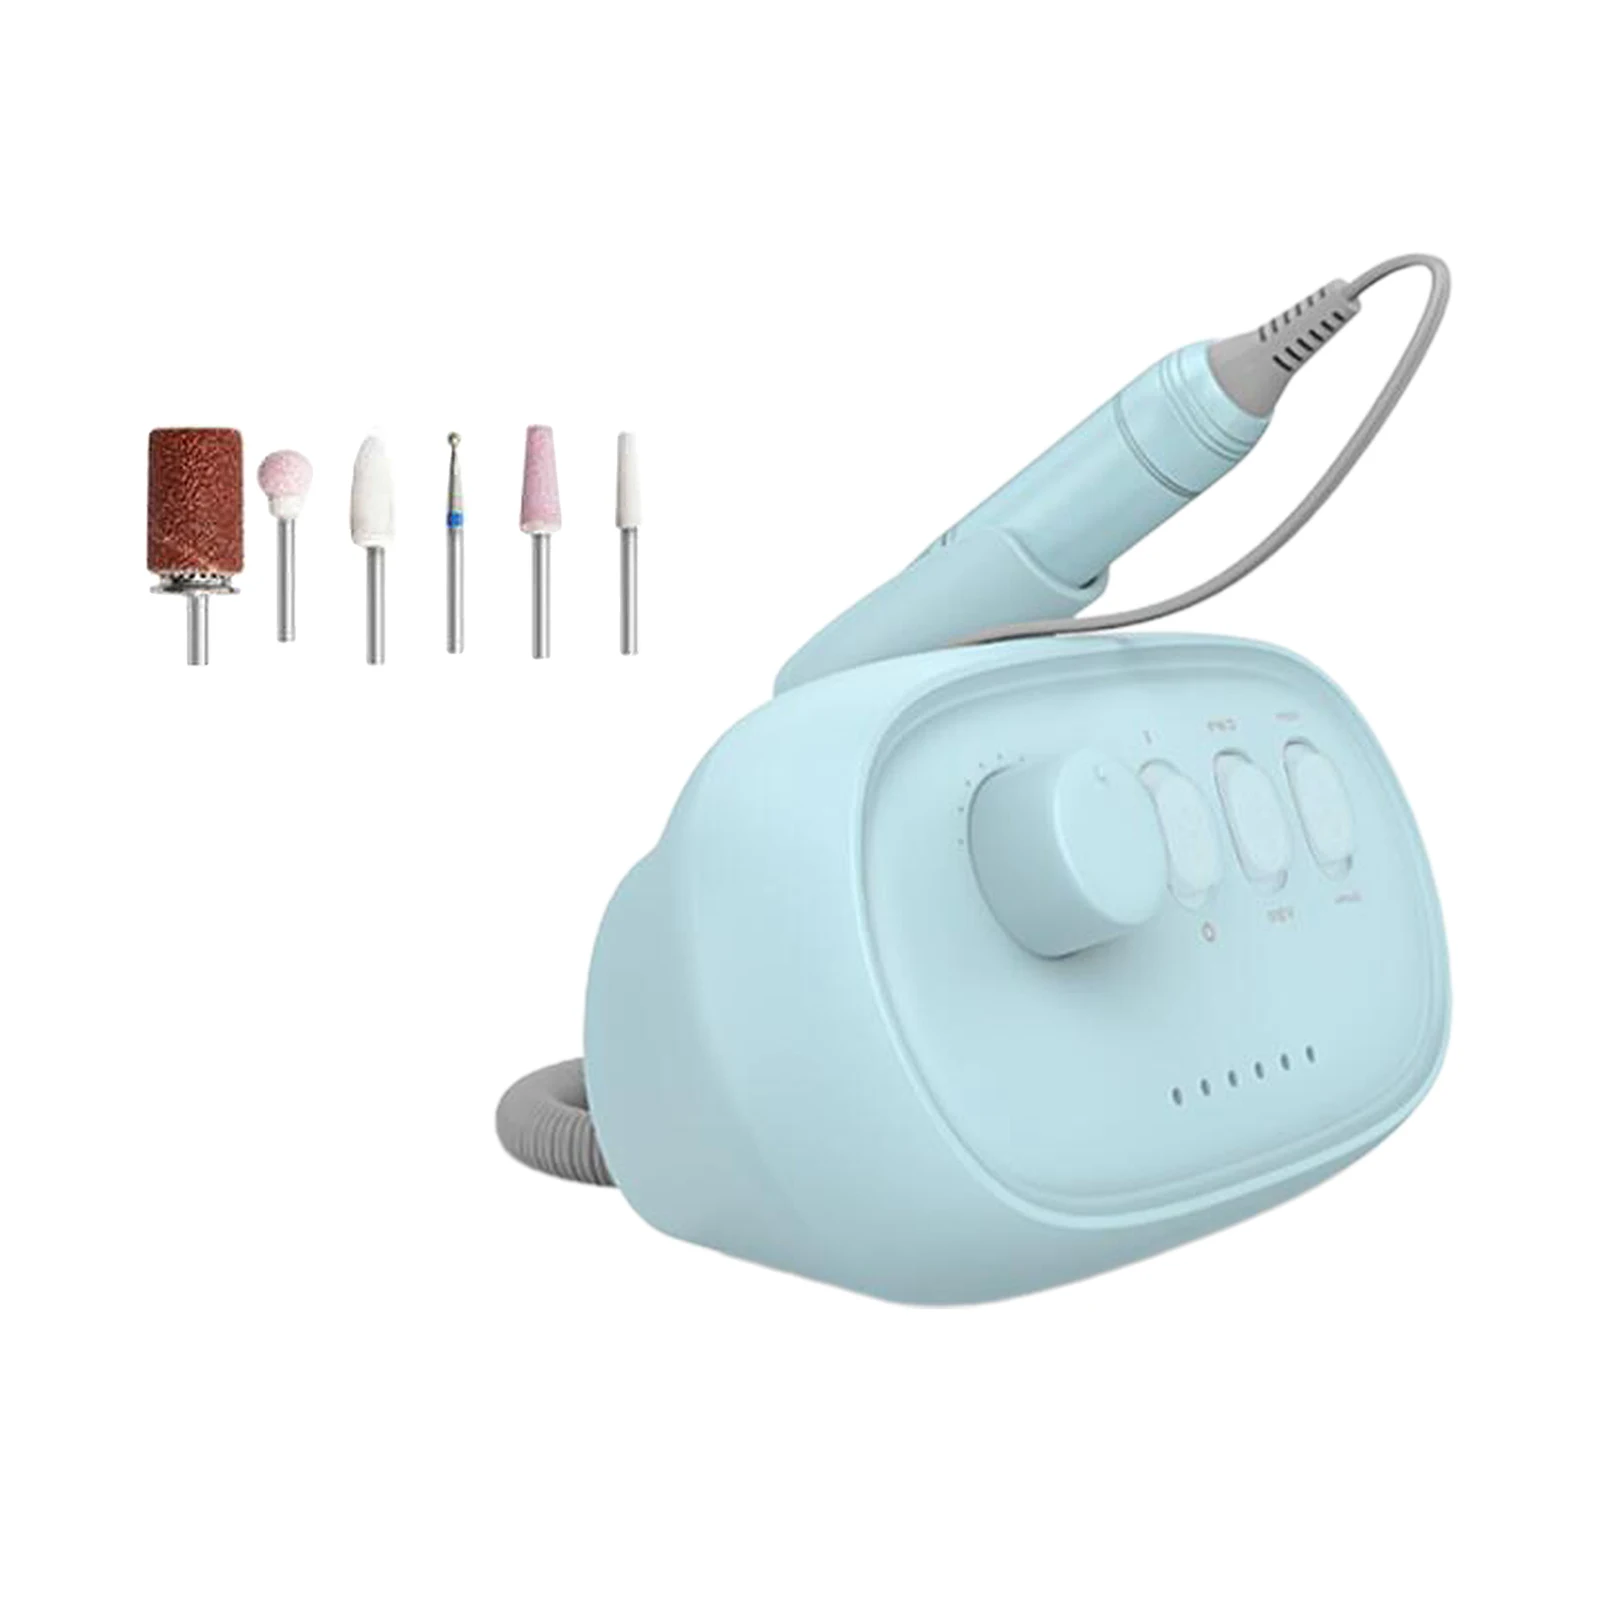 Professional Electric Nail Drill Nail File Machine Pedicure Sets Home Blue Nails Polisher Grinder Nail File Manicure Tools 